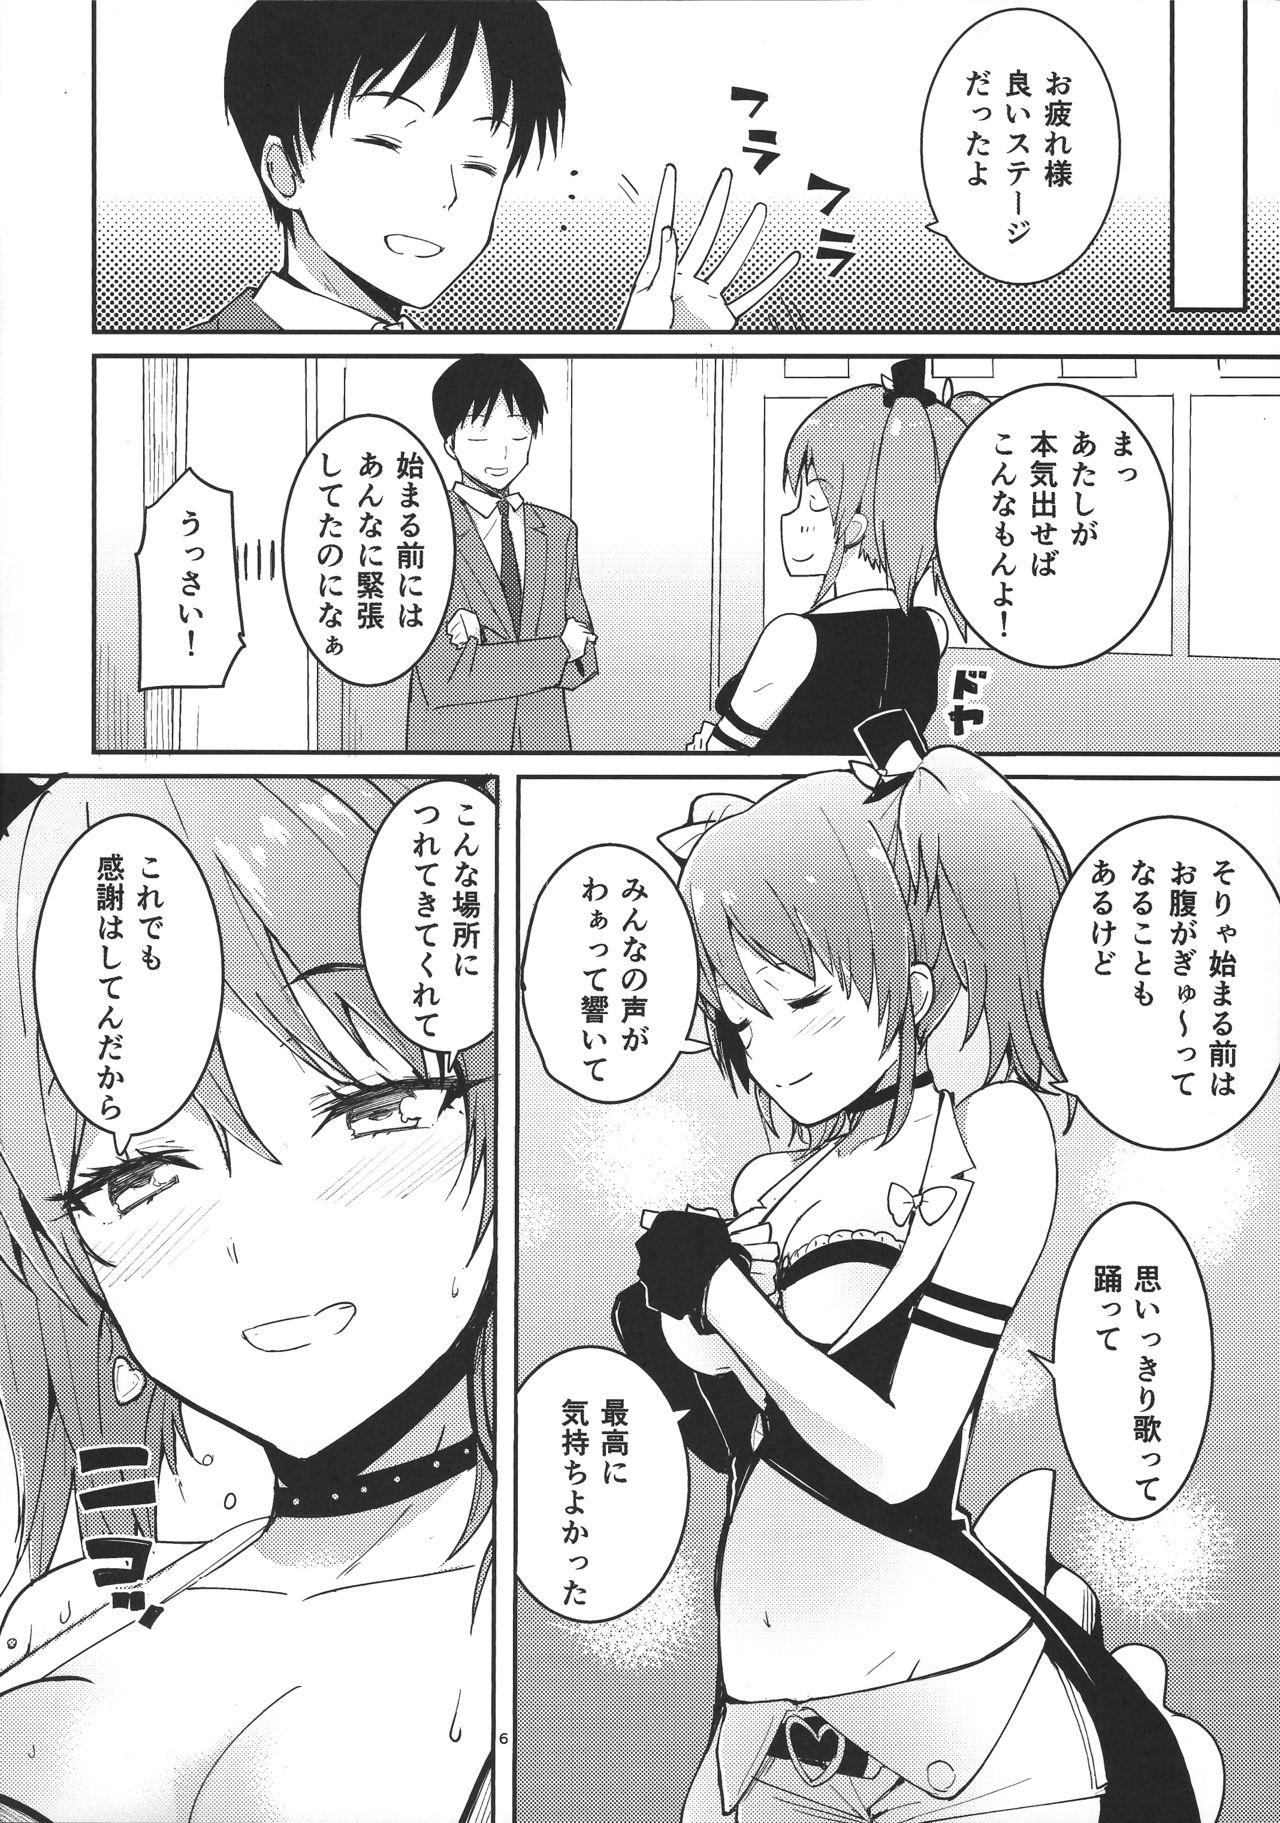 Her MikaLLL - The idolmaster Star - Page 5